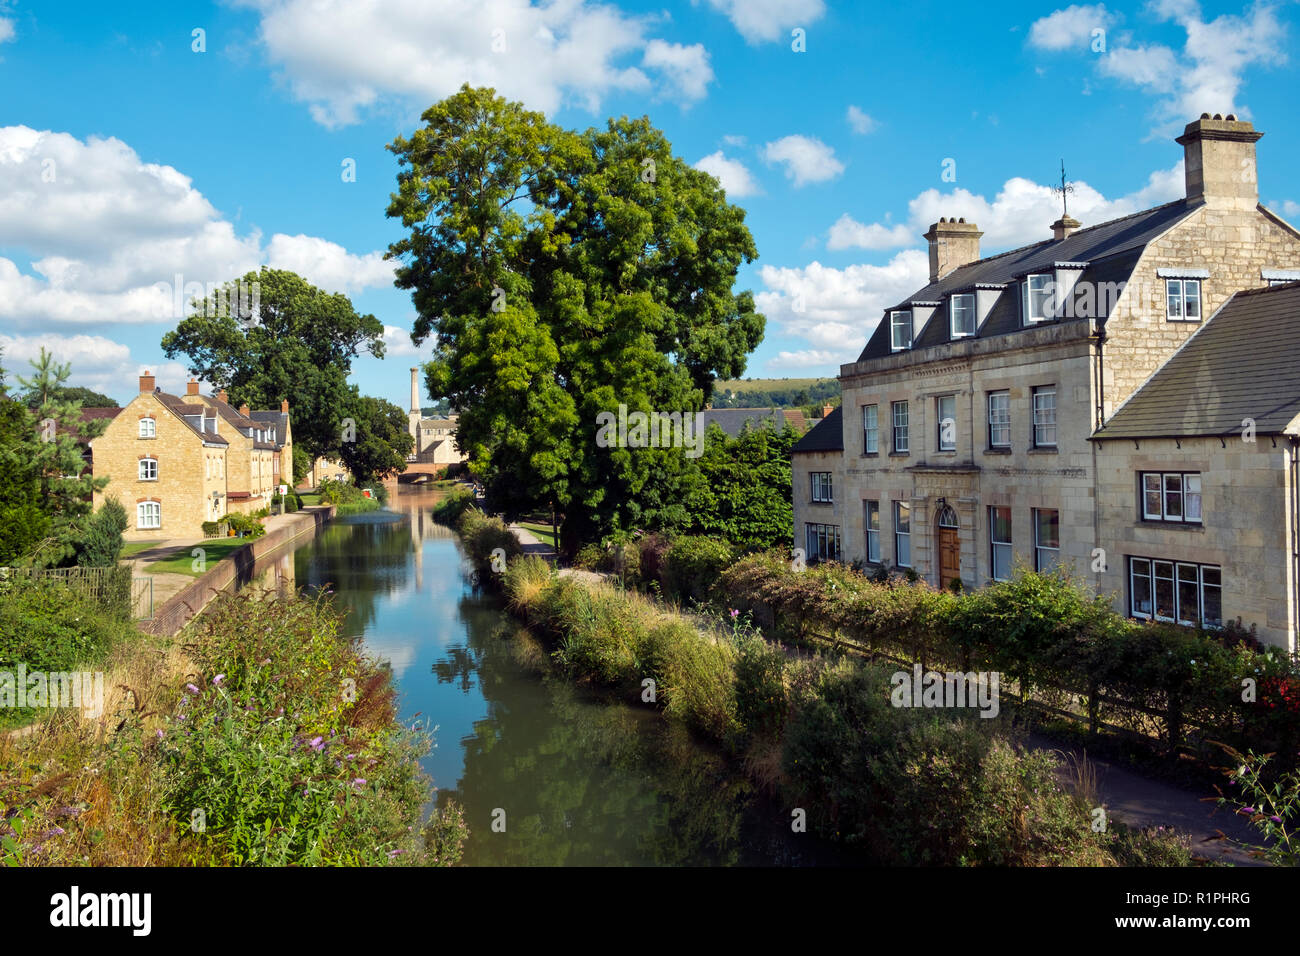 Stroud, Gloucestershire, UK - 26th August 2016: Summer sunshine brings people out to enjoy the regenerated Stroudwater Canal project at Ebley, Stroud, Gloucestershire, UK. Recently built housing enhances the waterside near historic Ebley Mill. Stock Photo